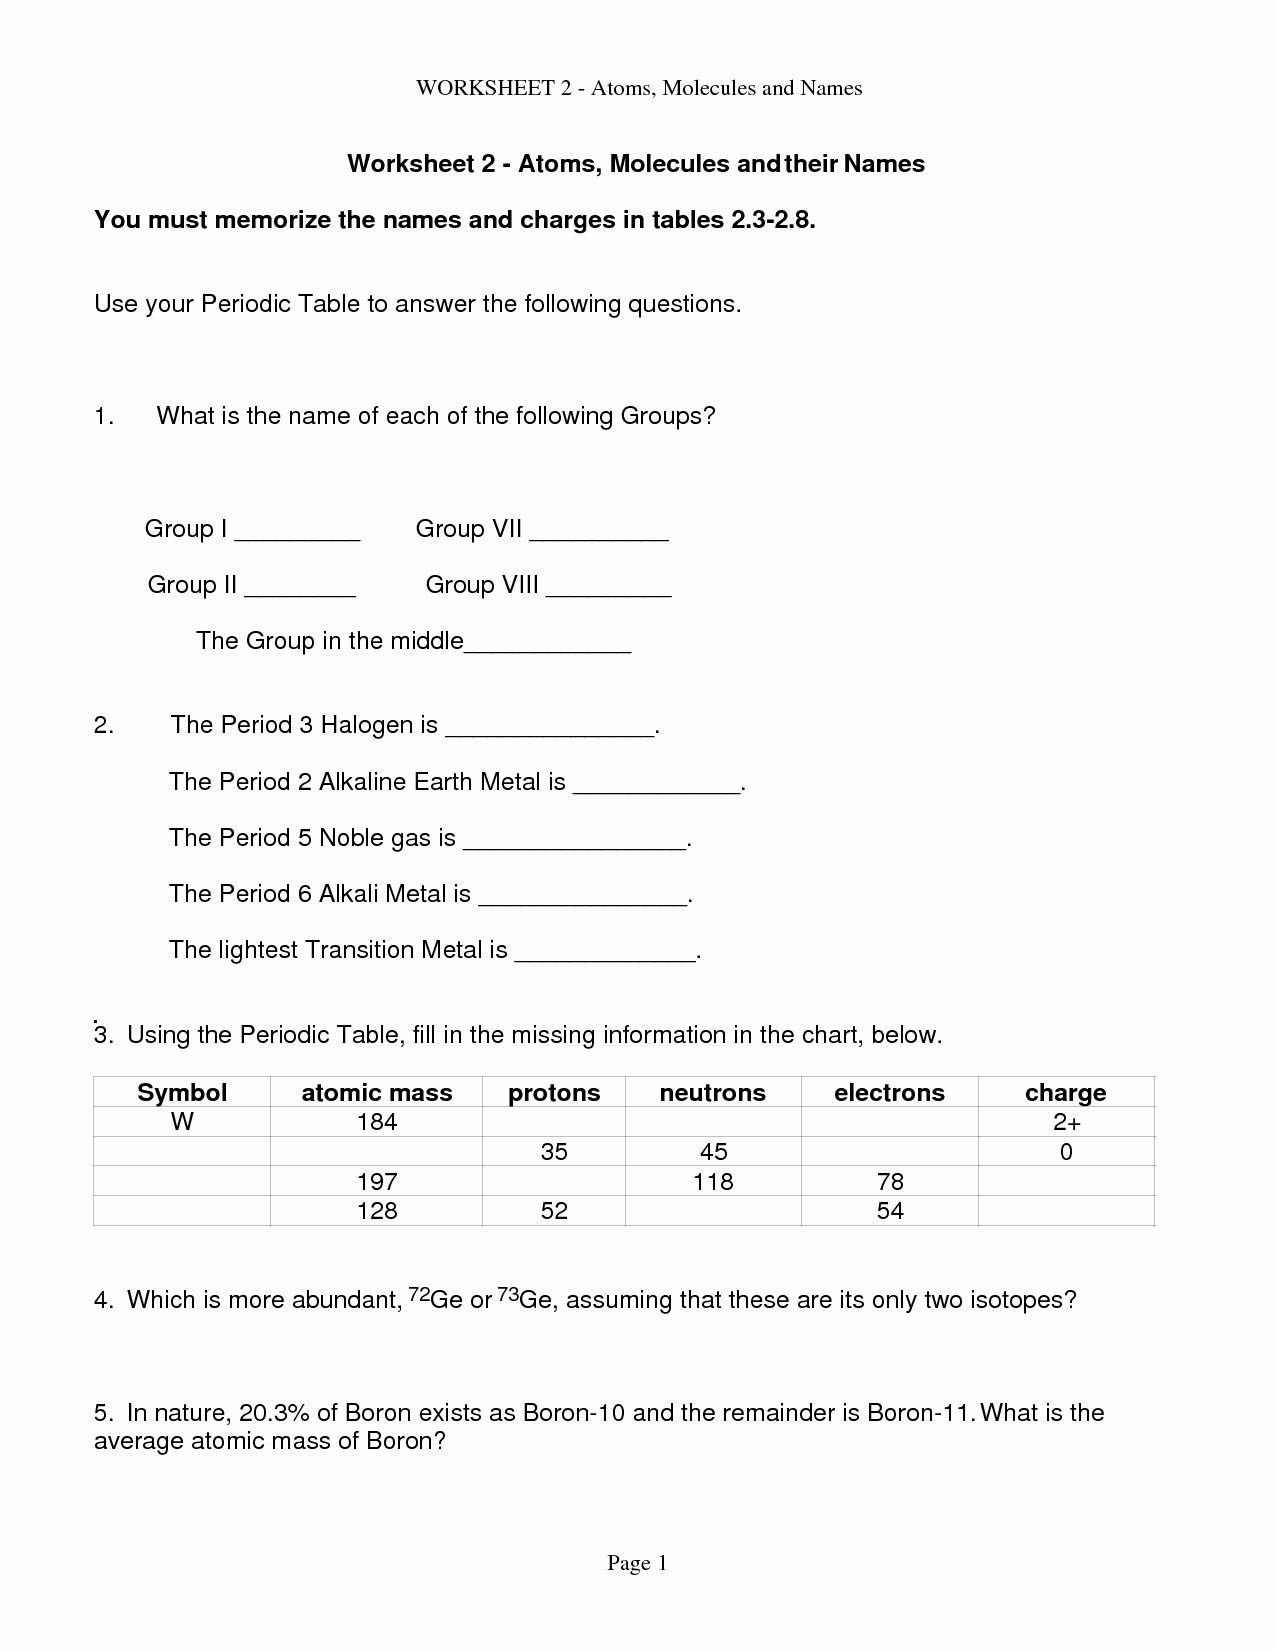 Counting atoms Worksheet Answer Key Awesome 17 Best Of Counting atoms Worksheet Answers